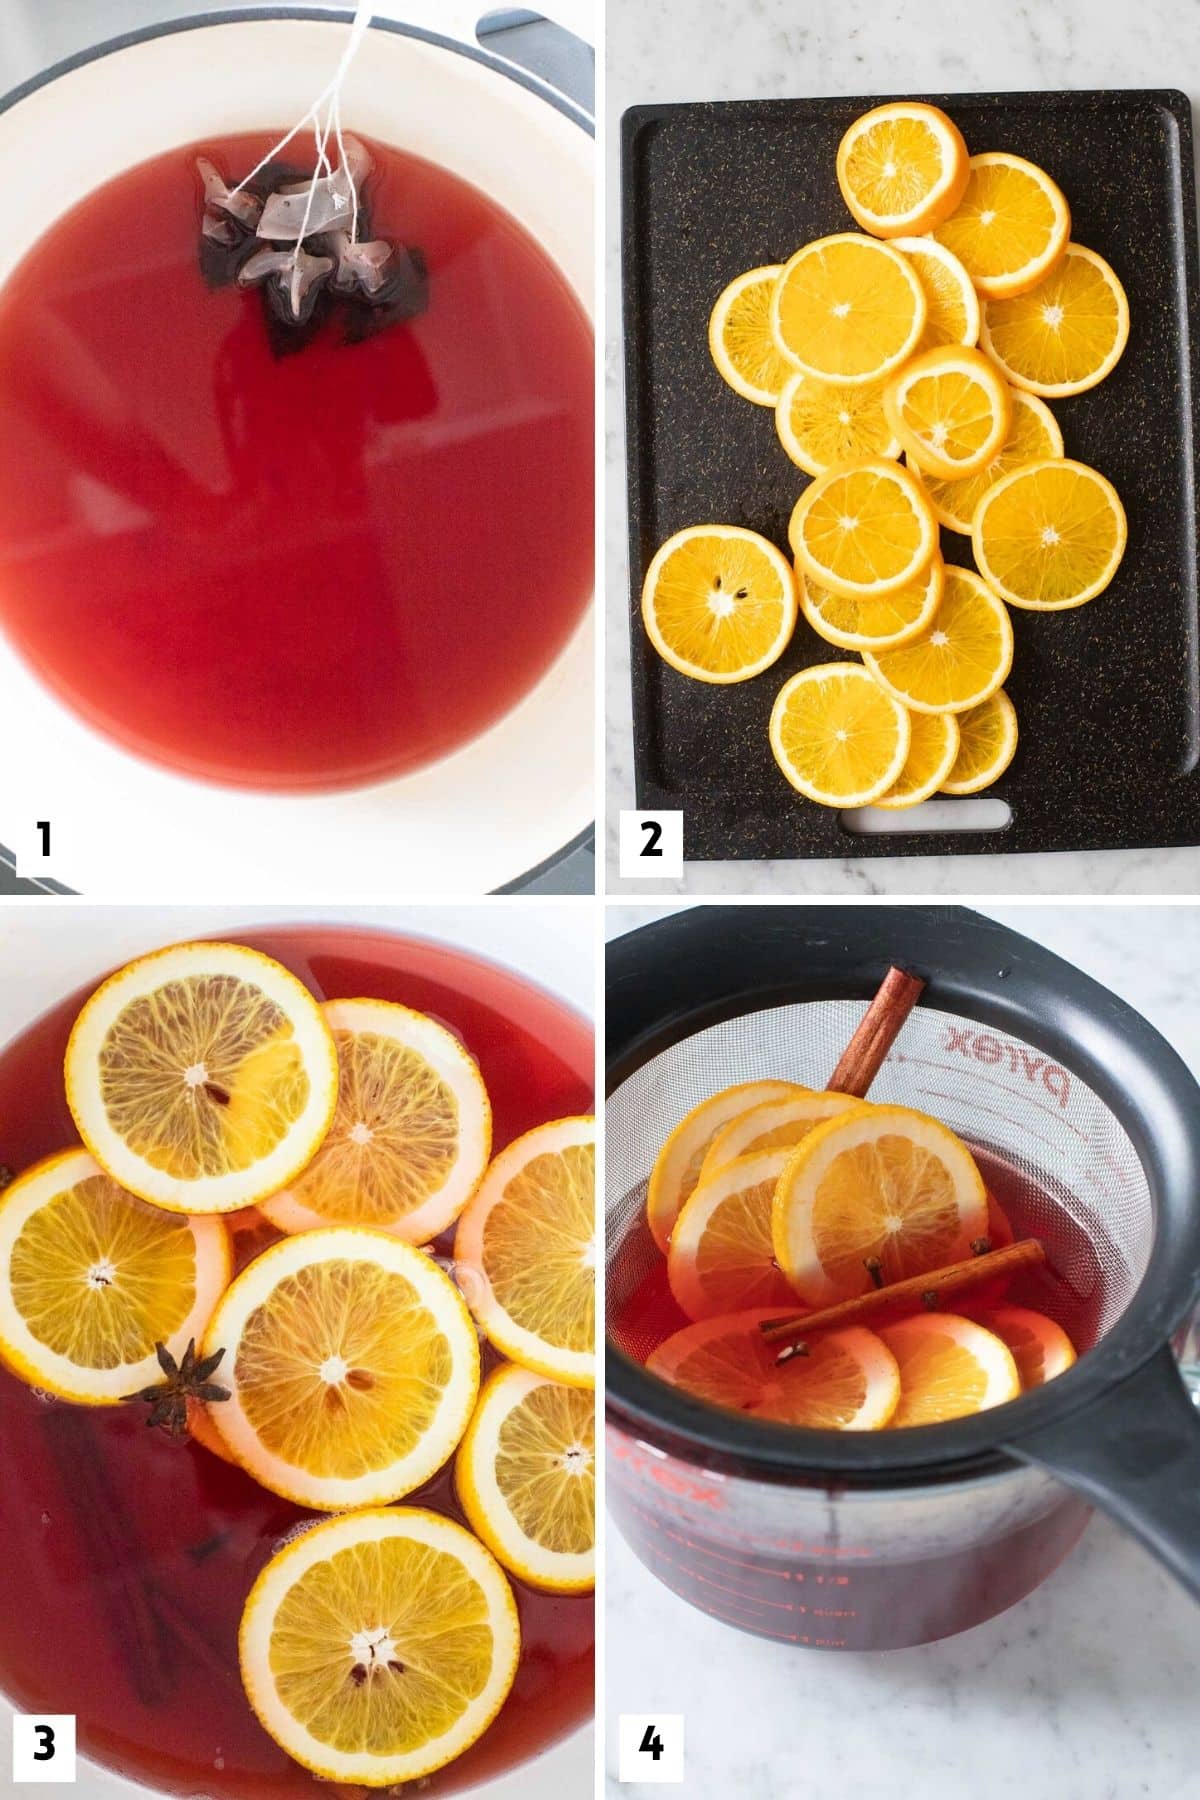 Steps for making non-alcoholic German Christmas punch.